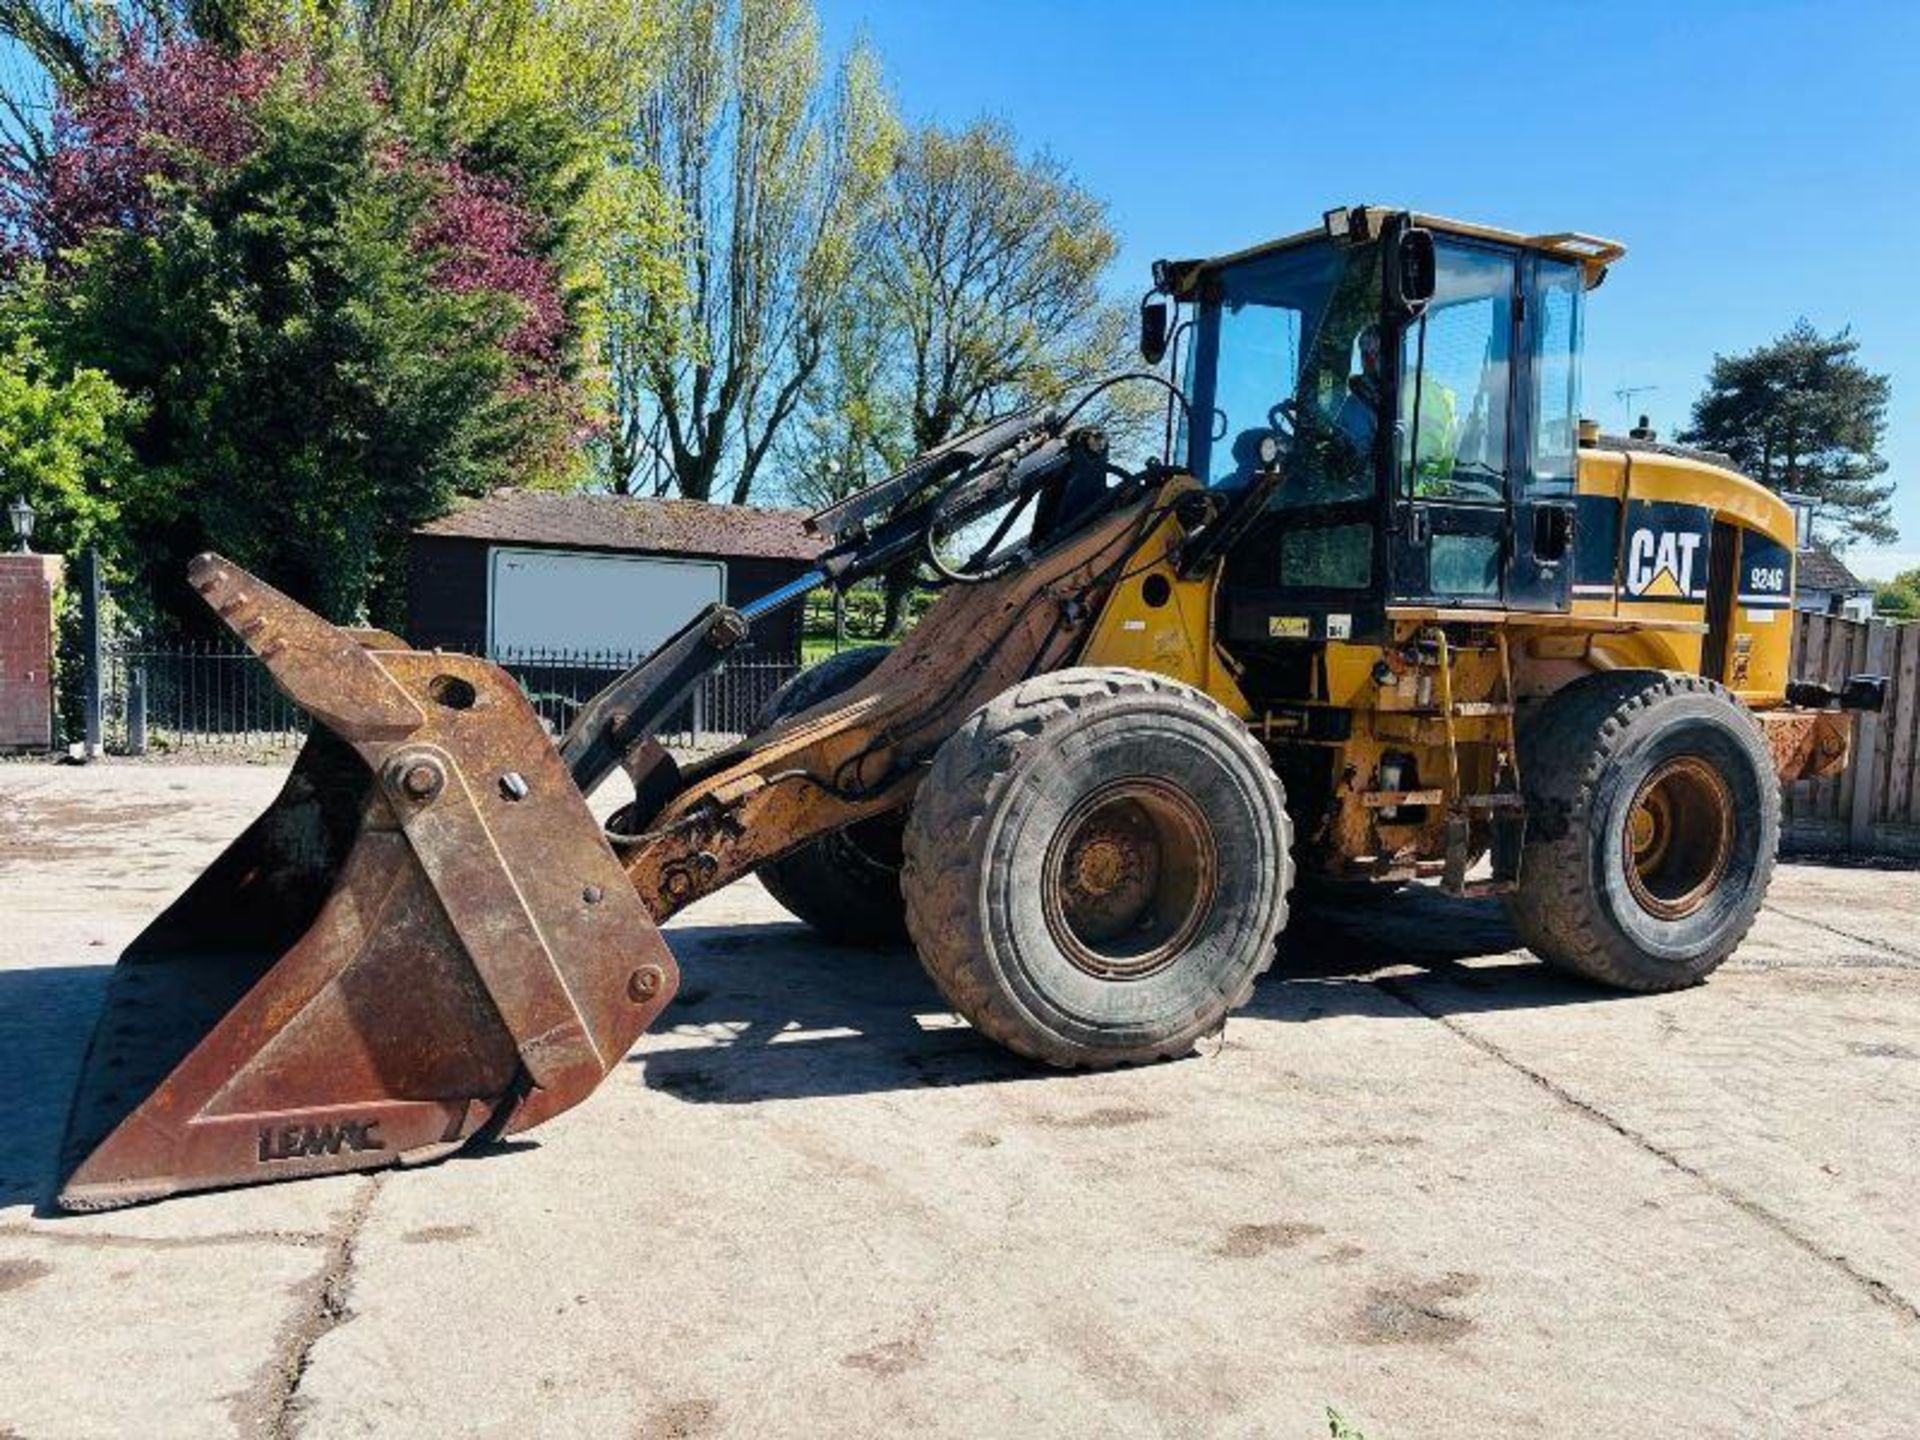 CATERPILLAR 924G 4WD LOADING SHOVEL C/W FOUR IN ONE BUCKET  - Image 16 of 18